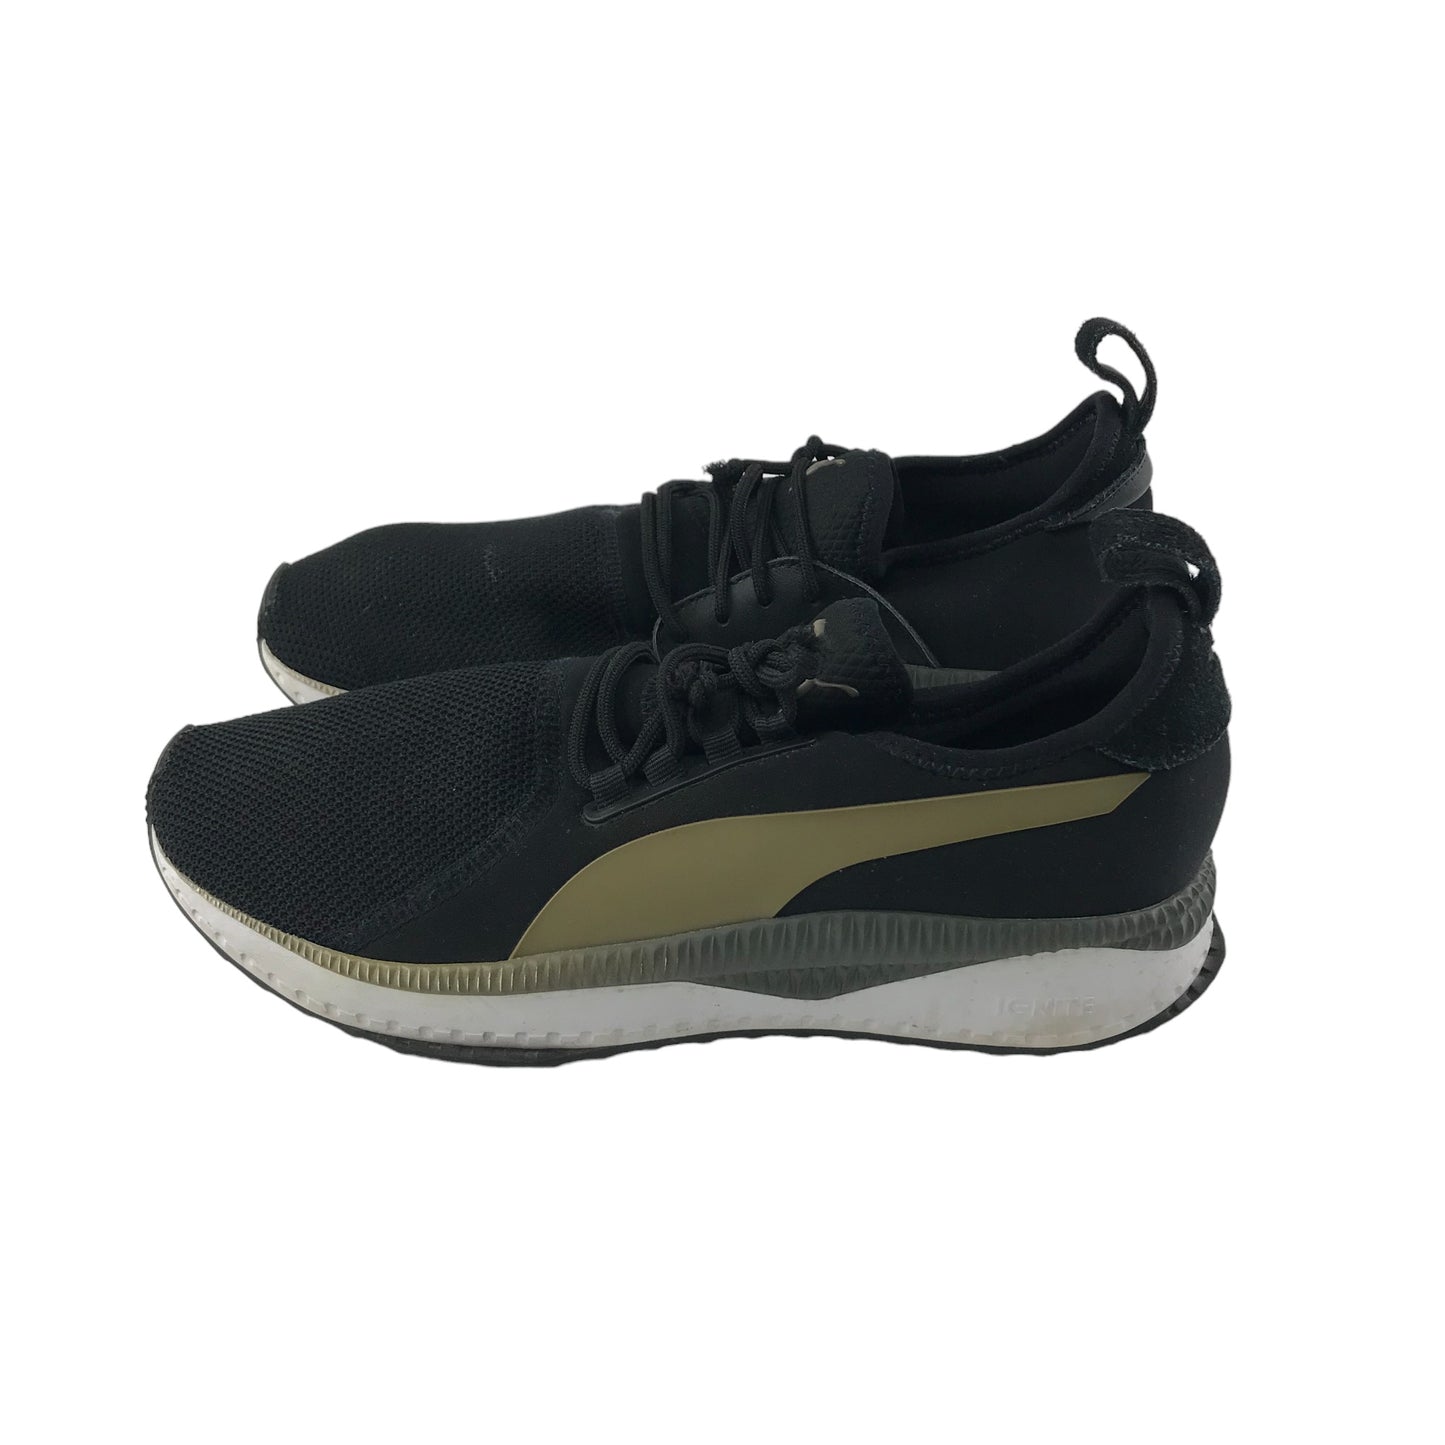 Puma Trainers Shoe Size 7 Black and Gold with Laces